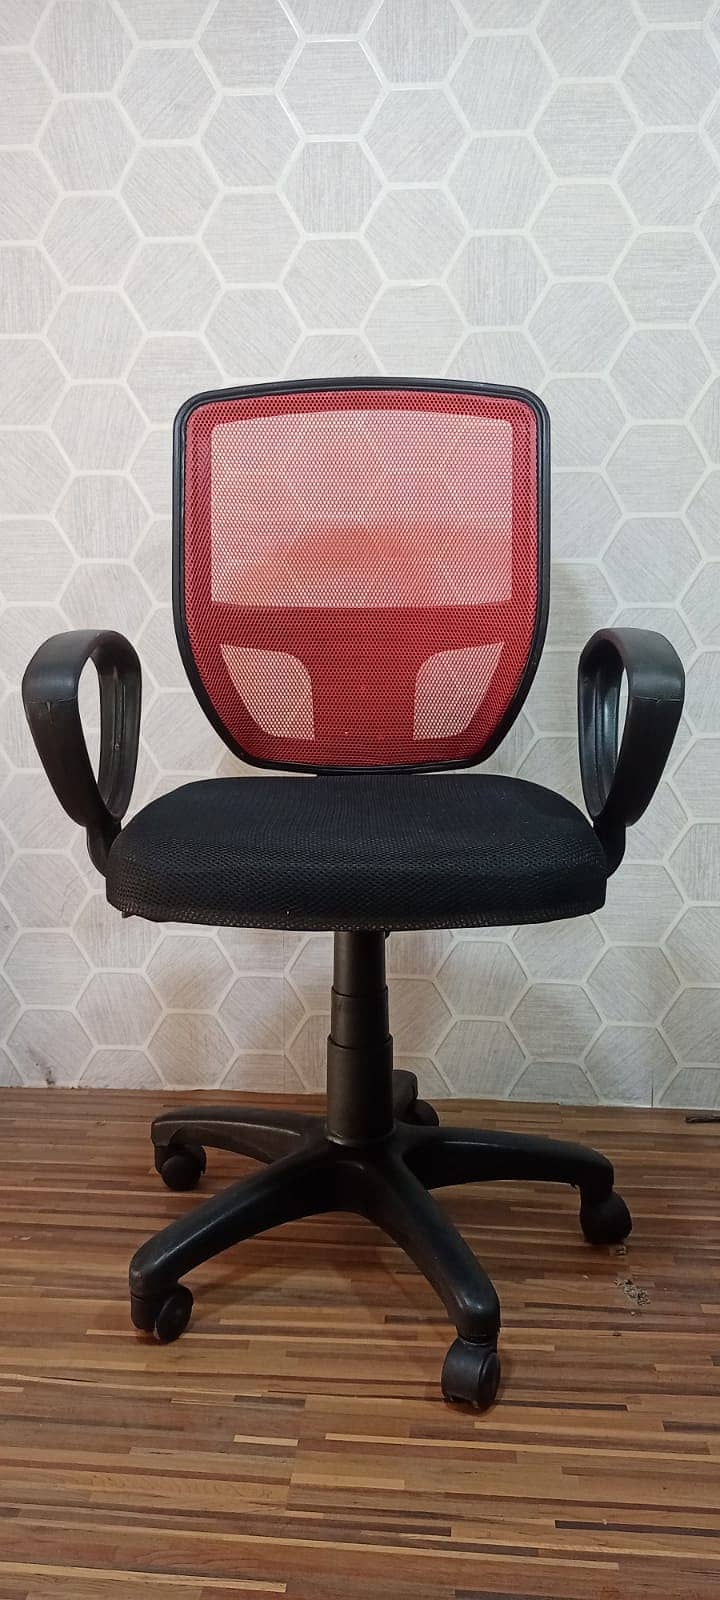 Chair / Executive chair / Office Chair / Chairs for sale 19